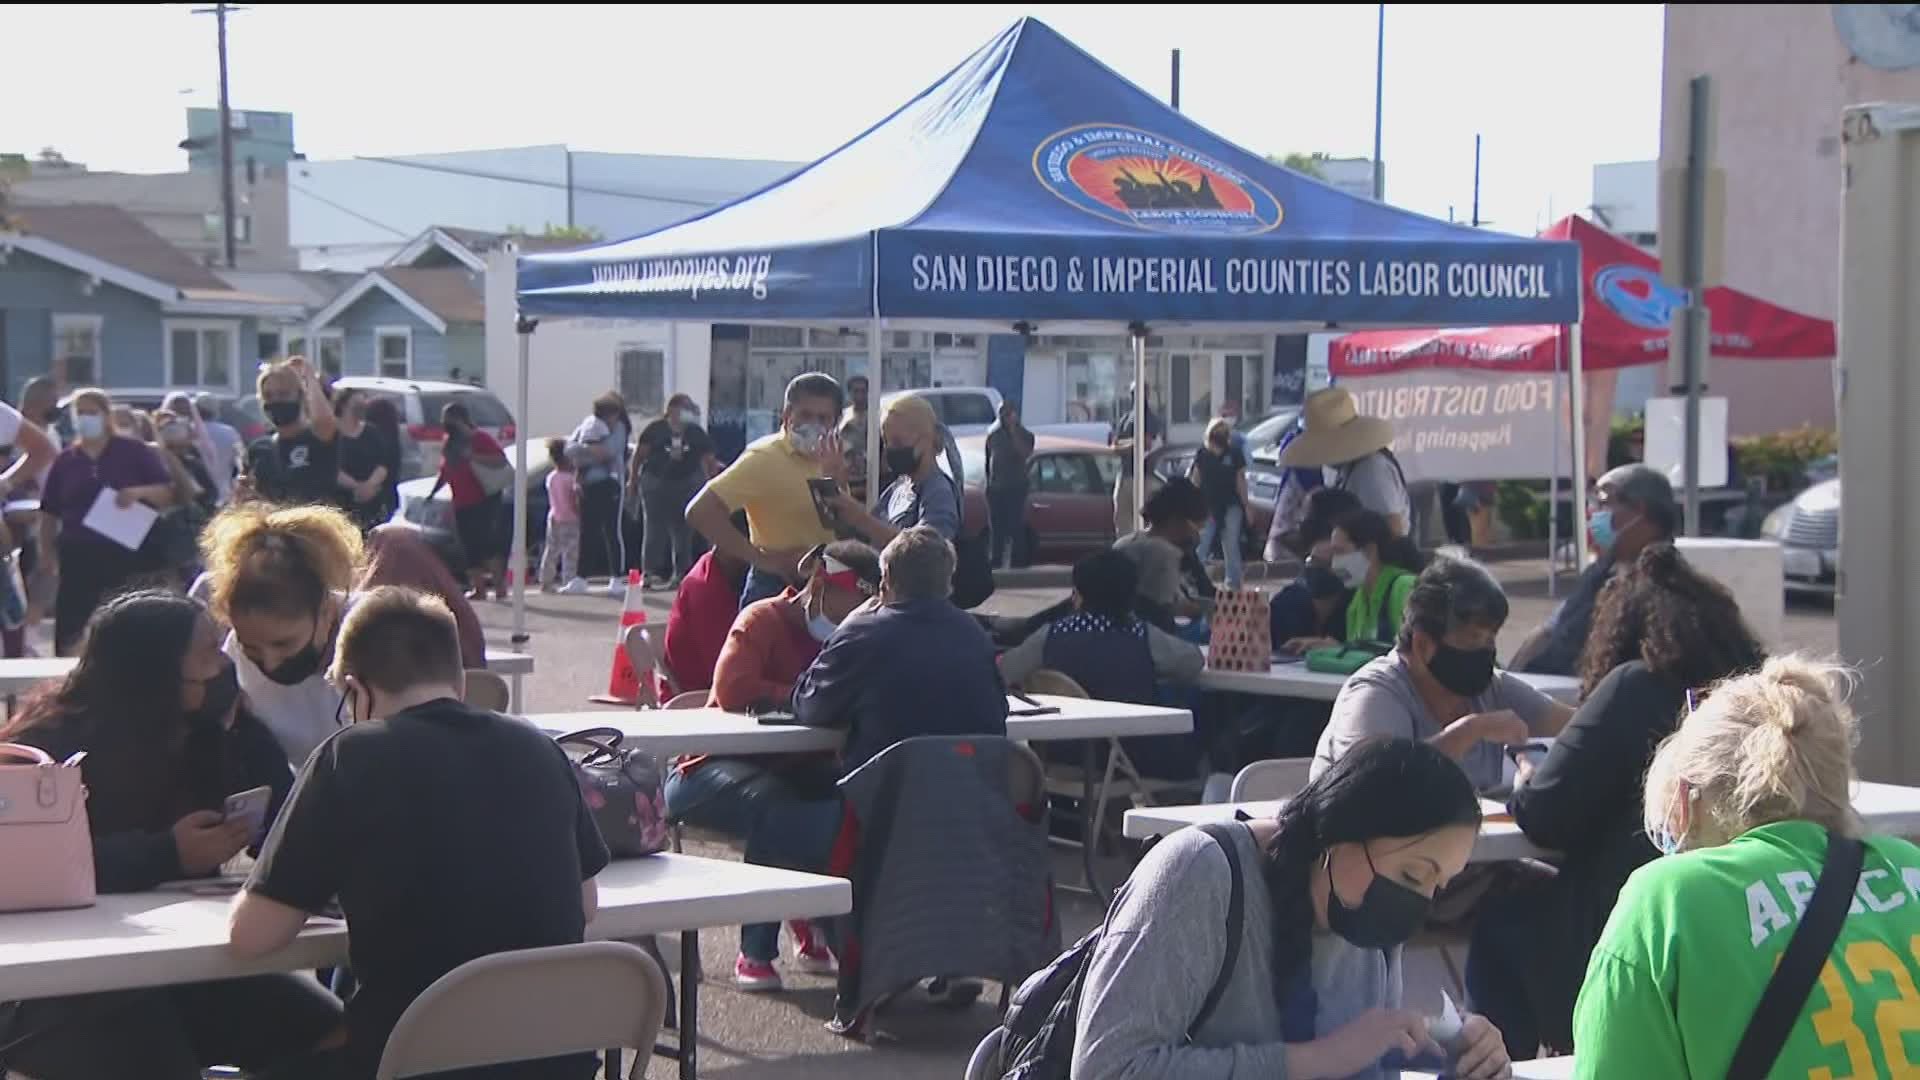 The event was hosted in the San Diego and Imperial Labor Council parking lot in City Heights.